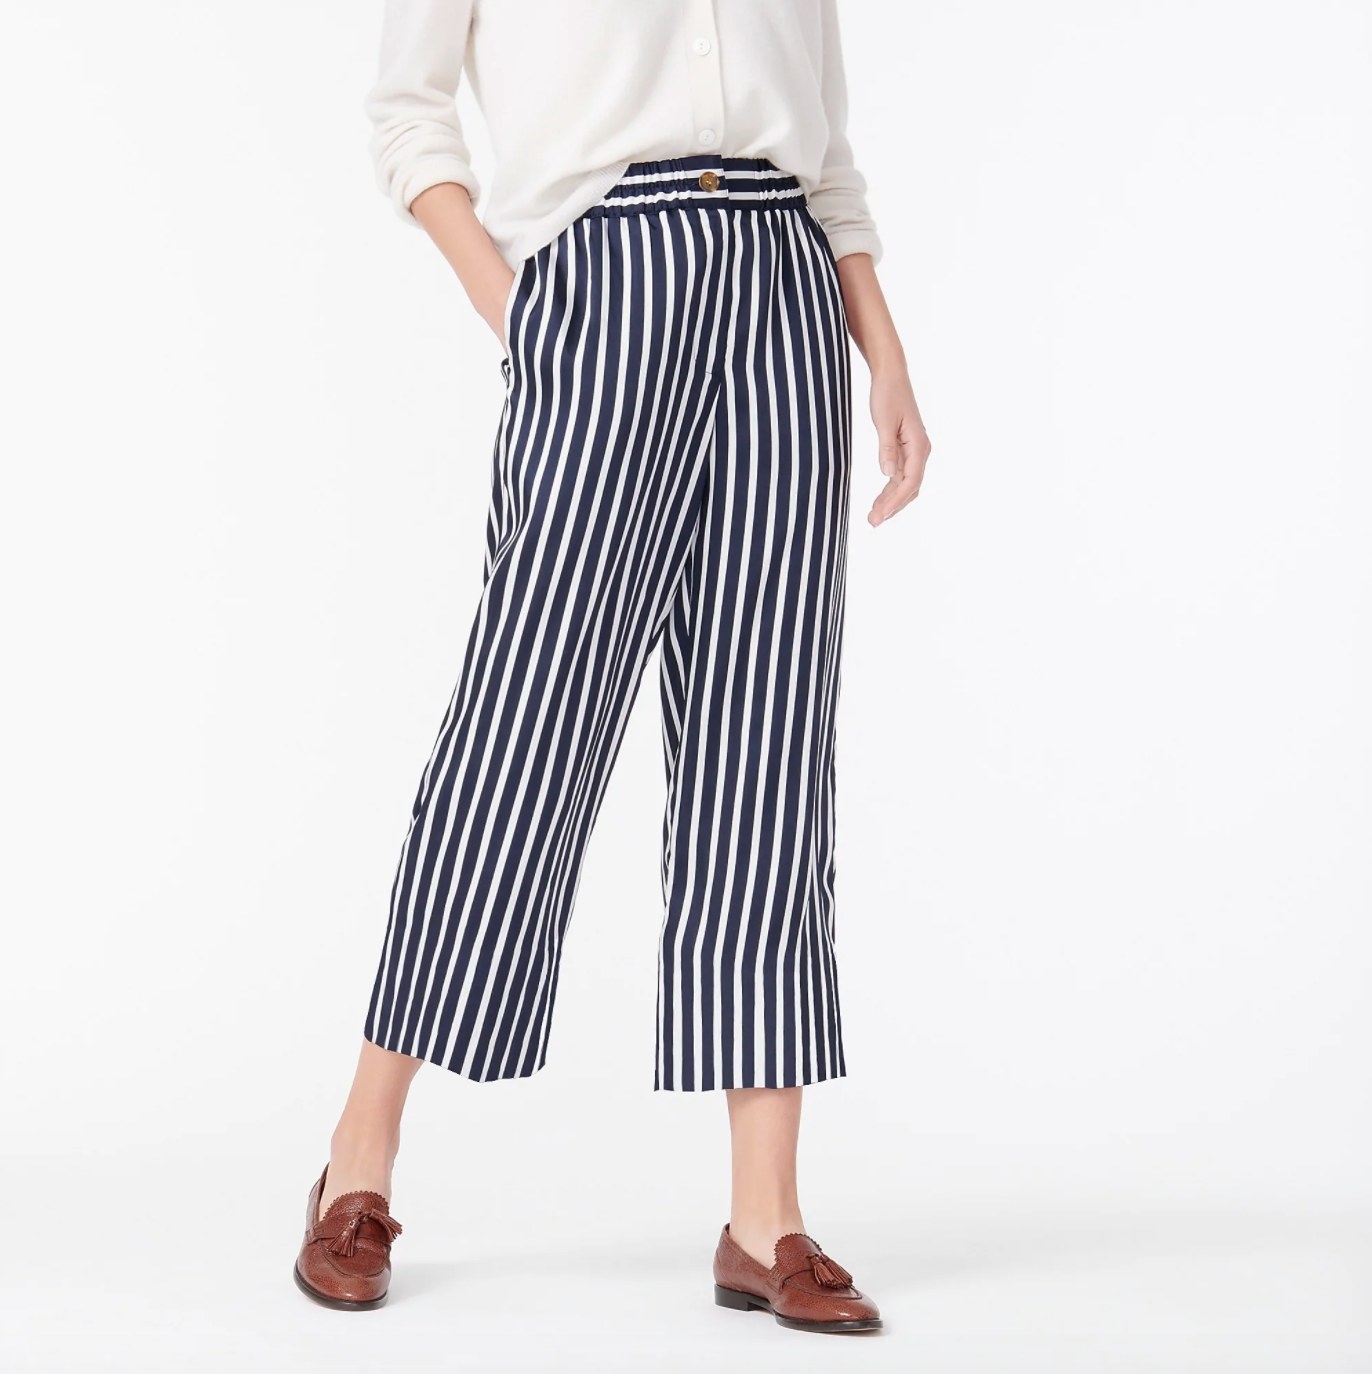 The cropped pinstripe pants